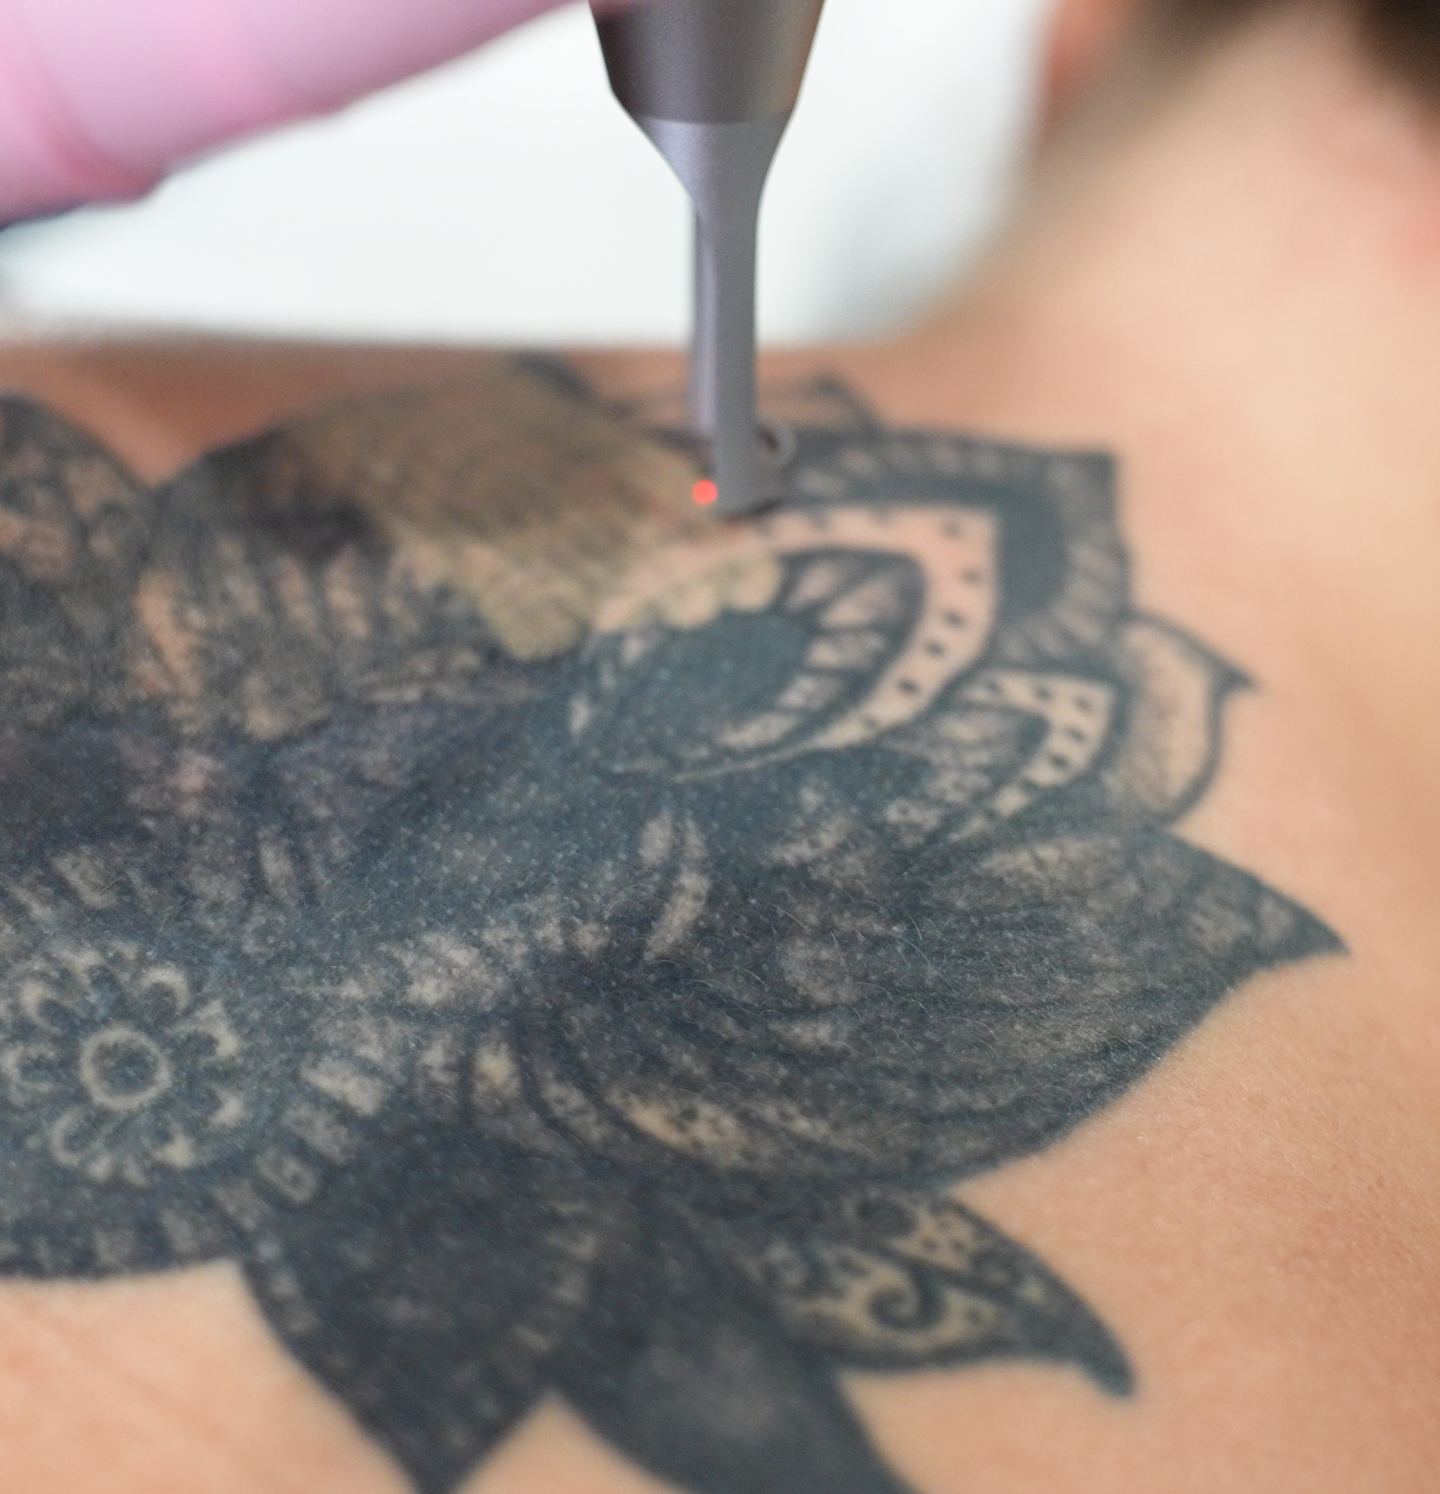 Is Tattoo Removal Cream Safe?